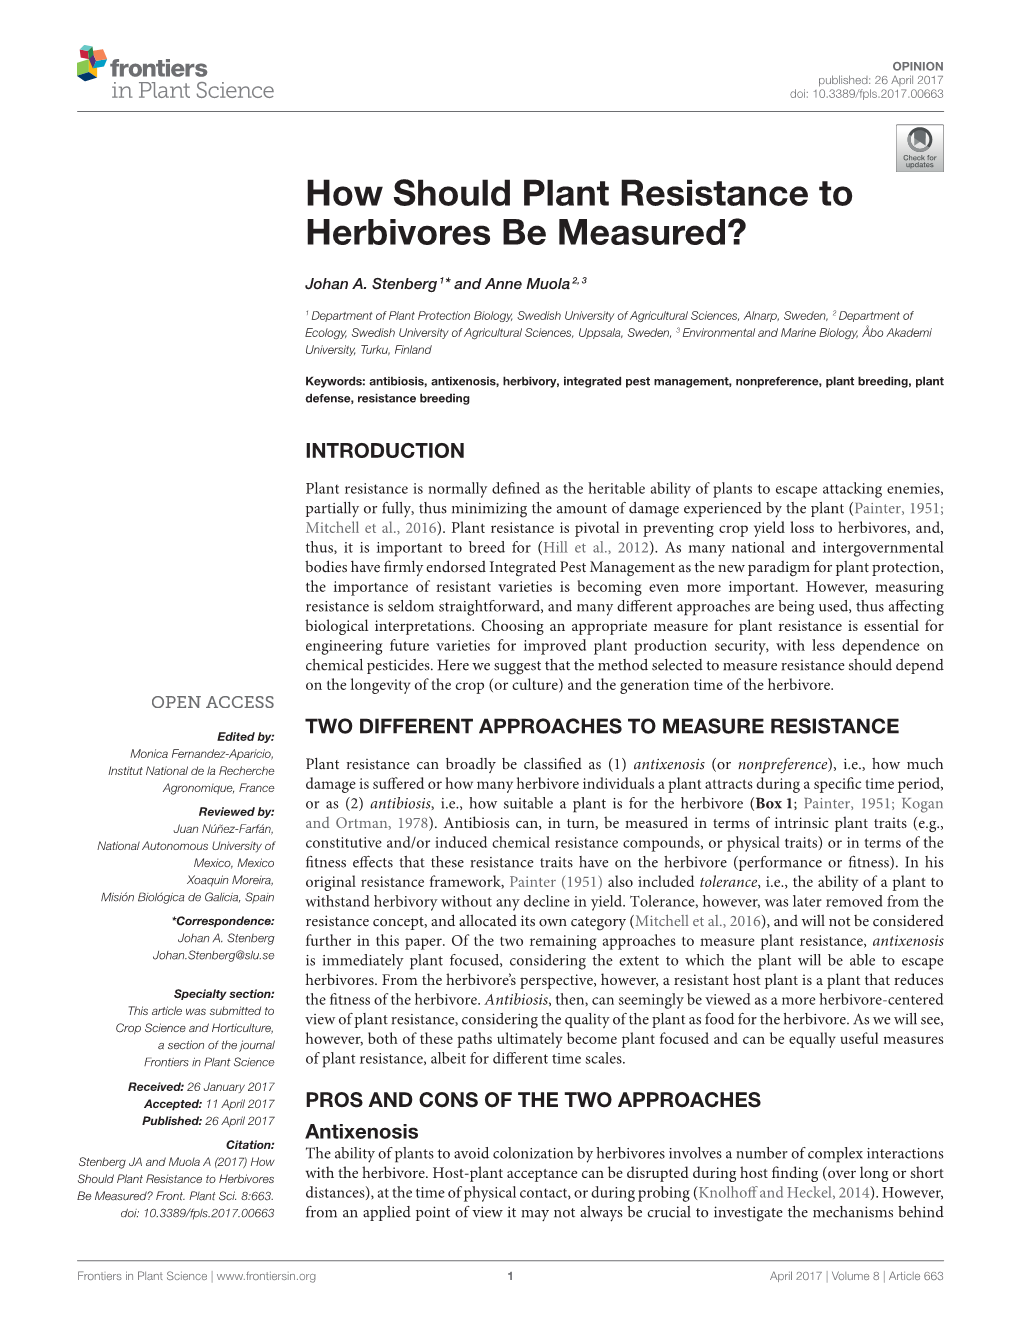 How Should Plant Resistance to Herbivores Be Measured?